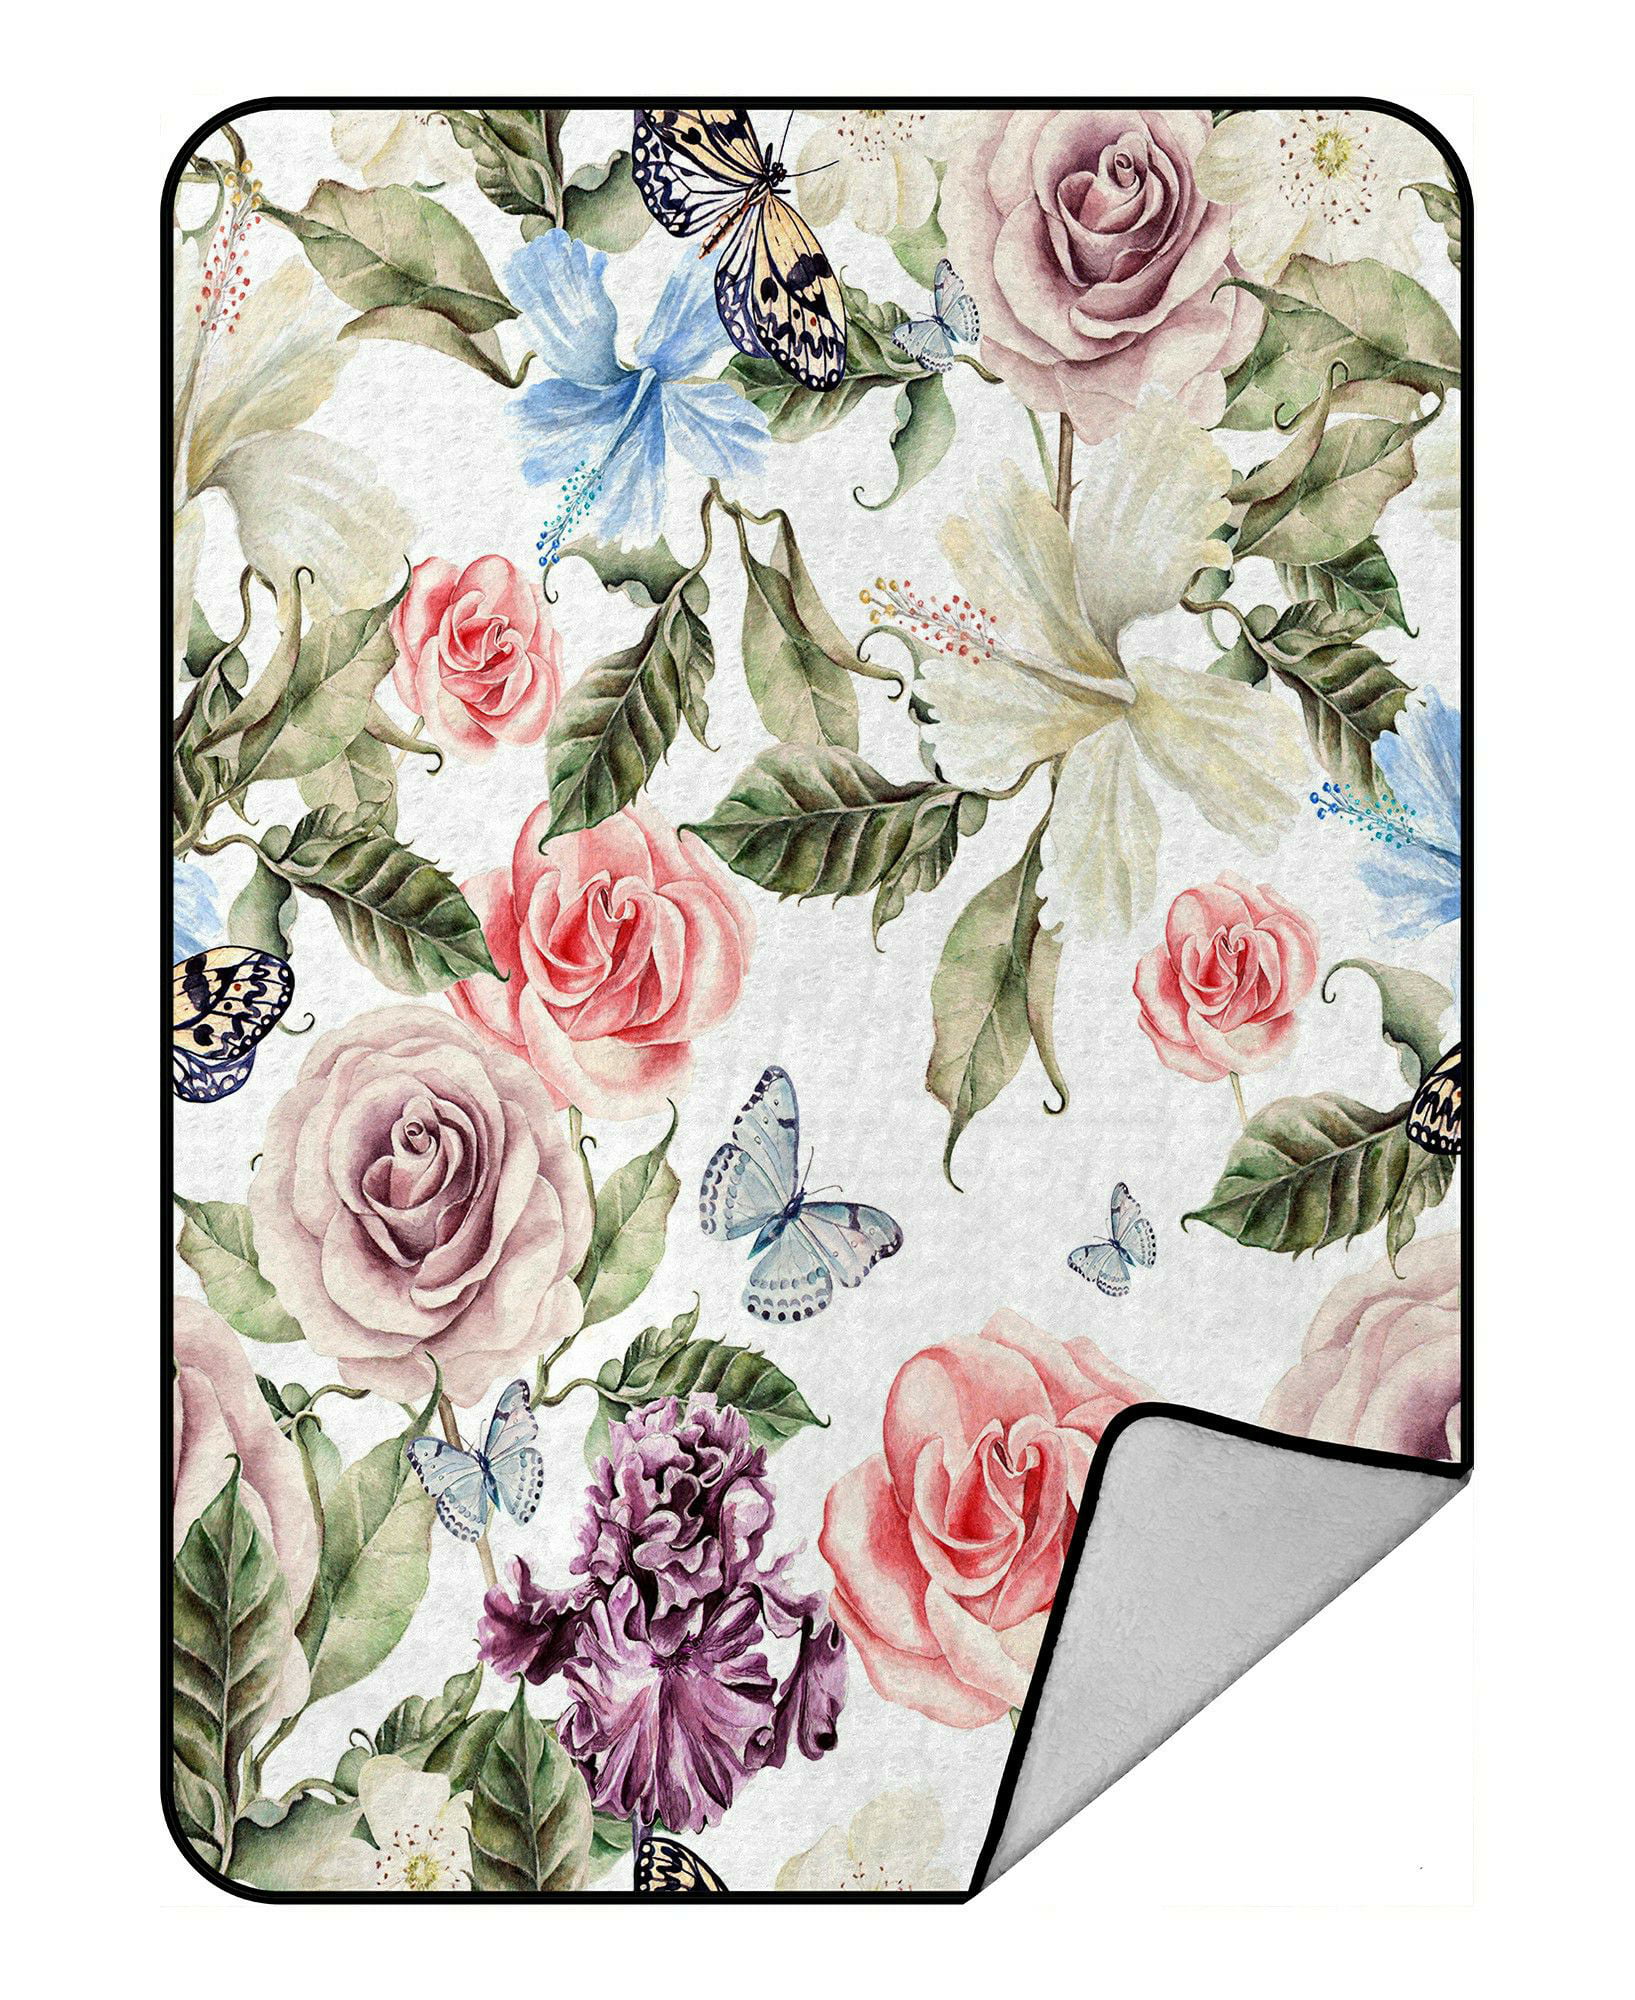 Flannel Fleece Accent Piece Soft Couch Cover for Adults Watercolor Art of Romantic Flowers and Leaves Branches Blossoming Lunarable Rose Throw Blanket Fuchsia Reseda Green 70 x 90